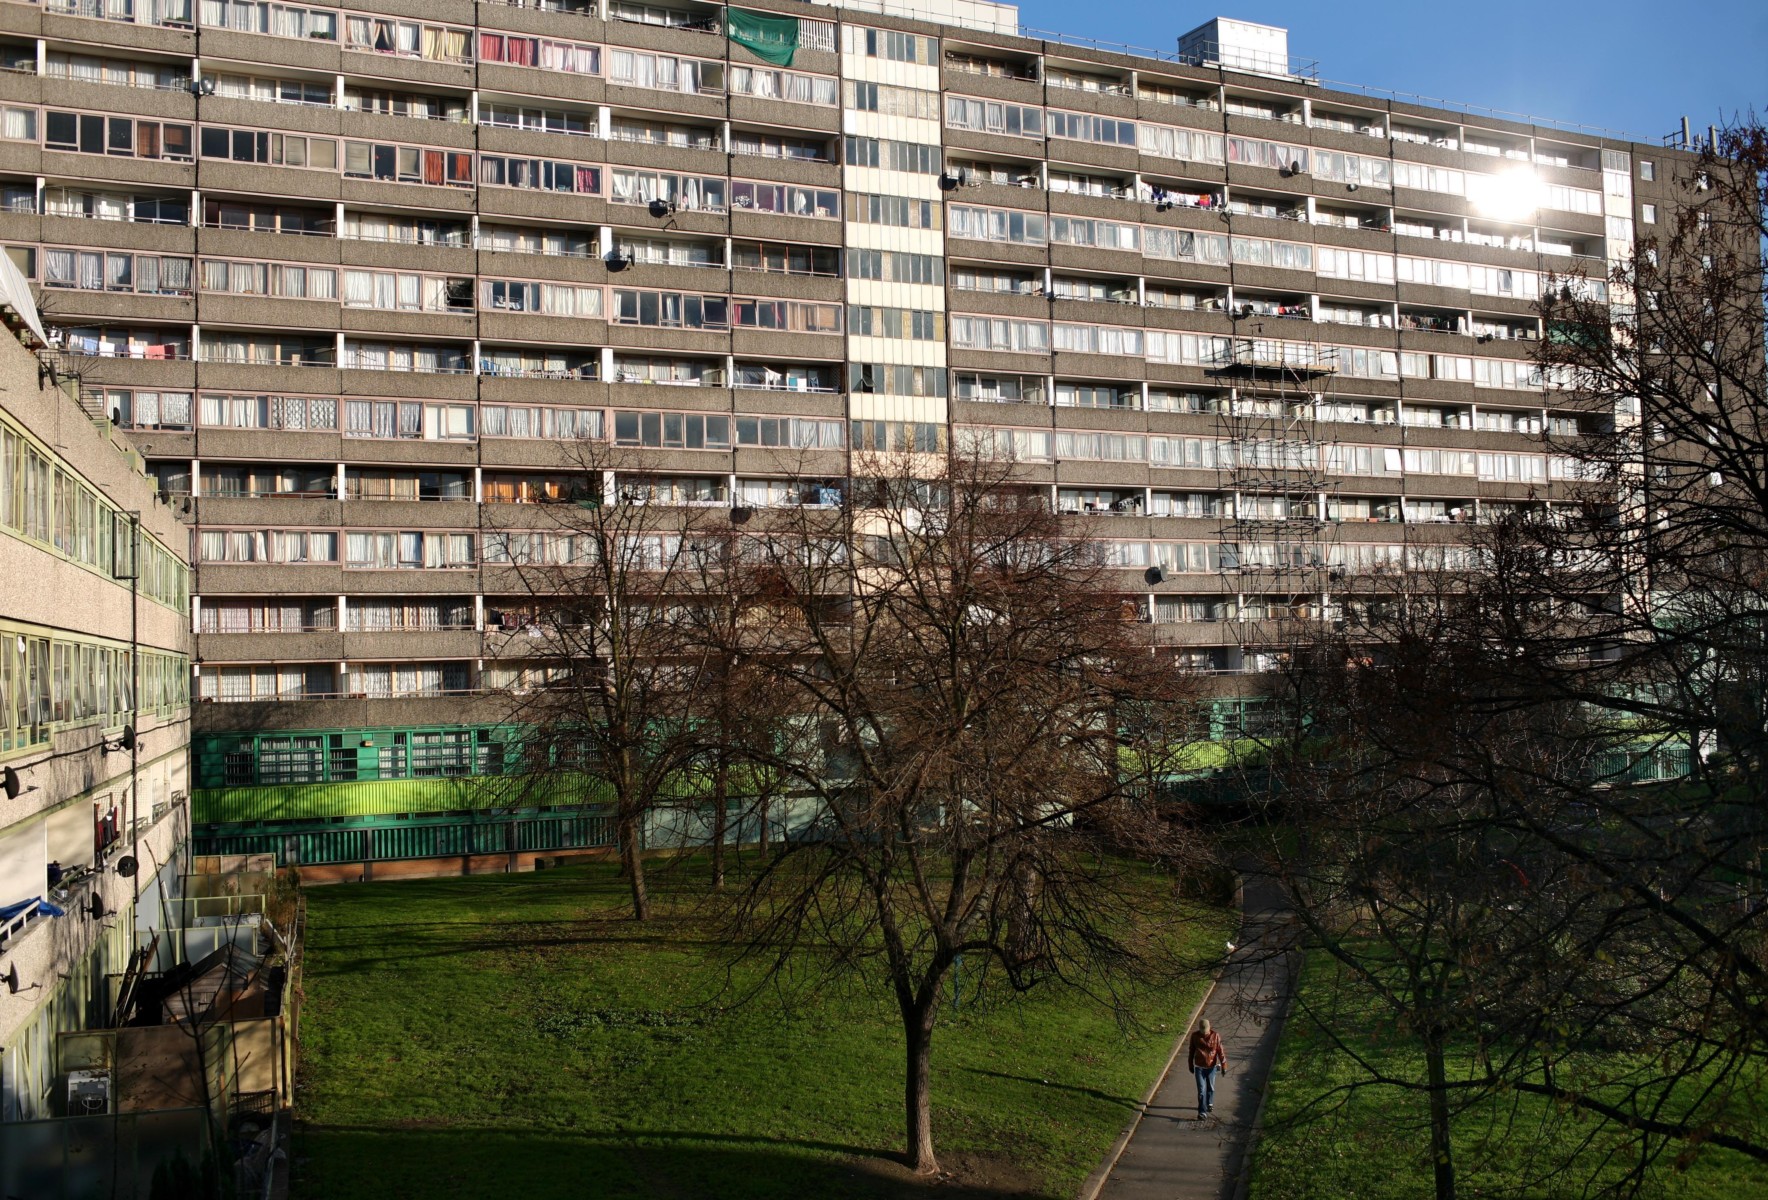 Nelson grew up on the rough Aylesbury Estate in South East London